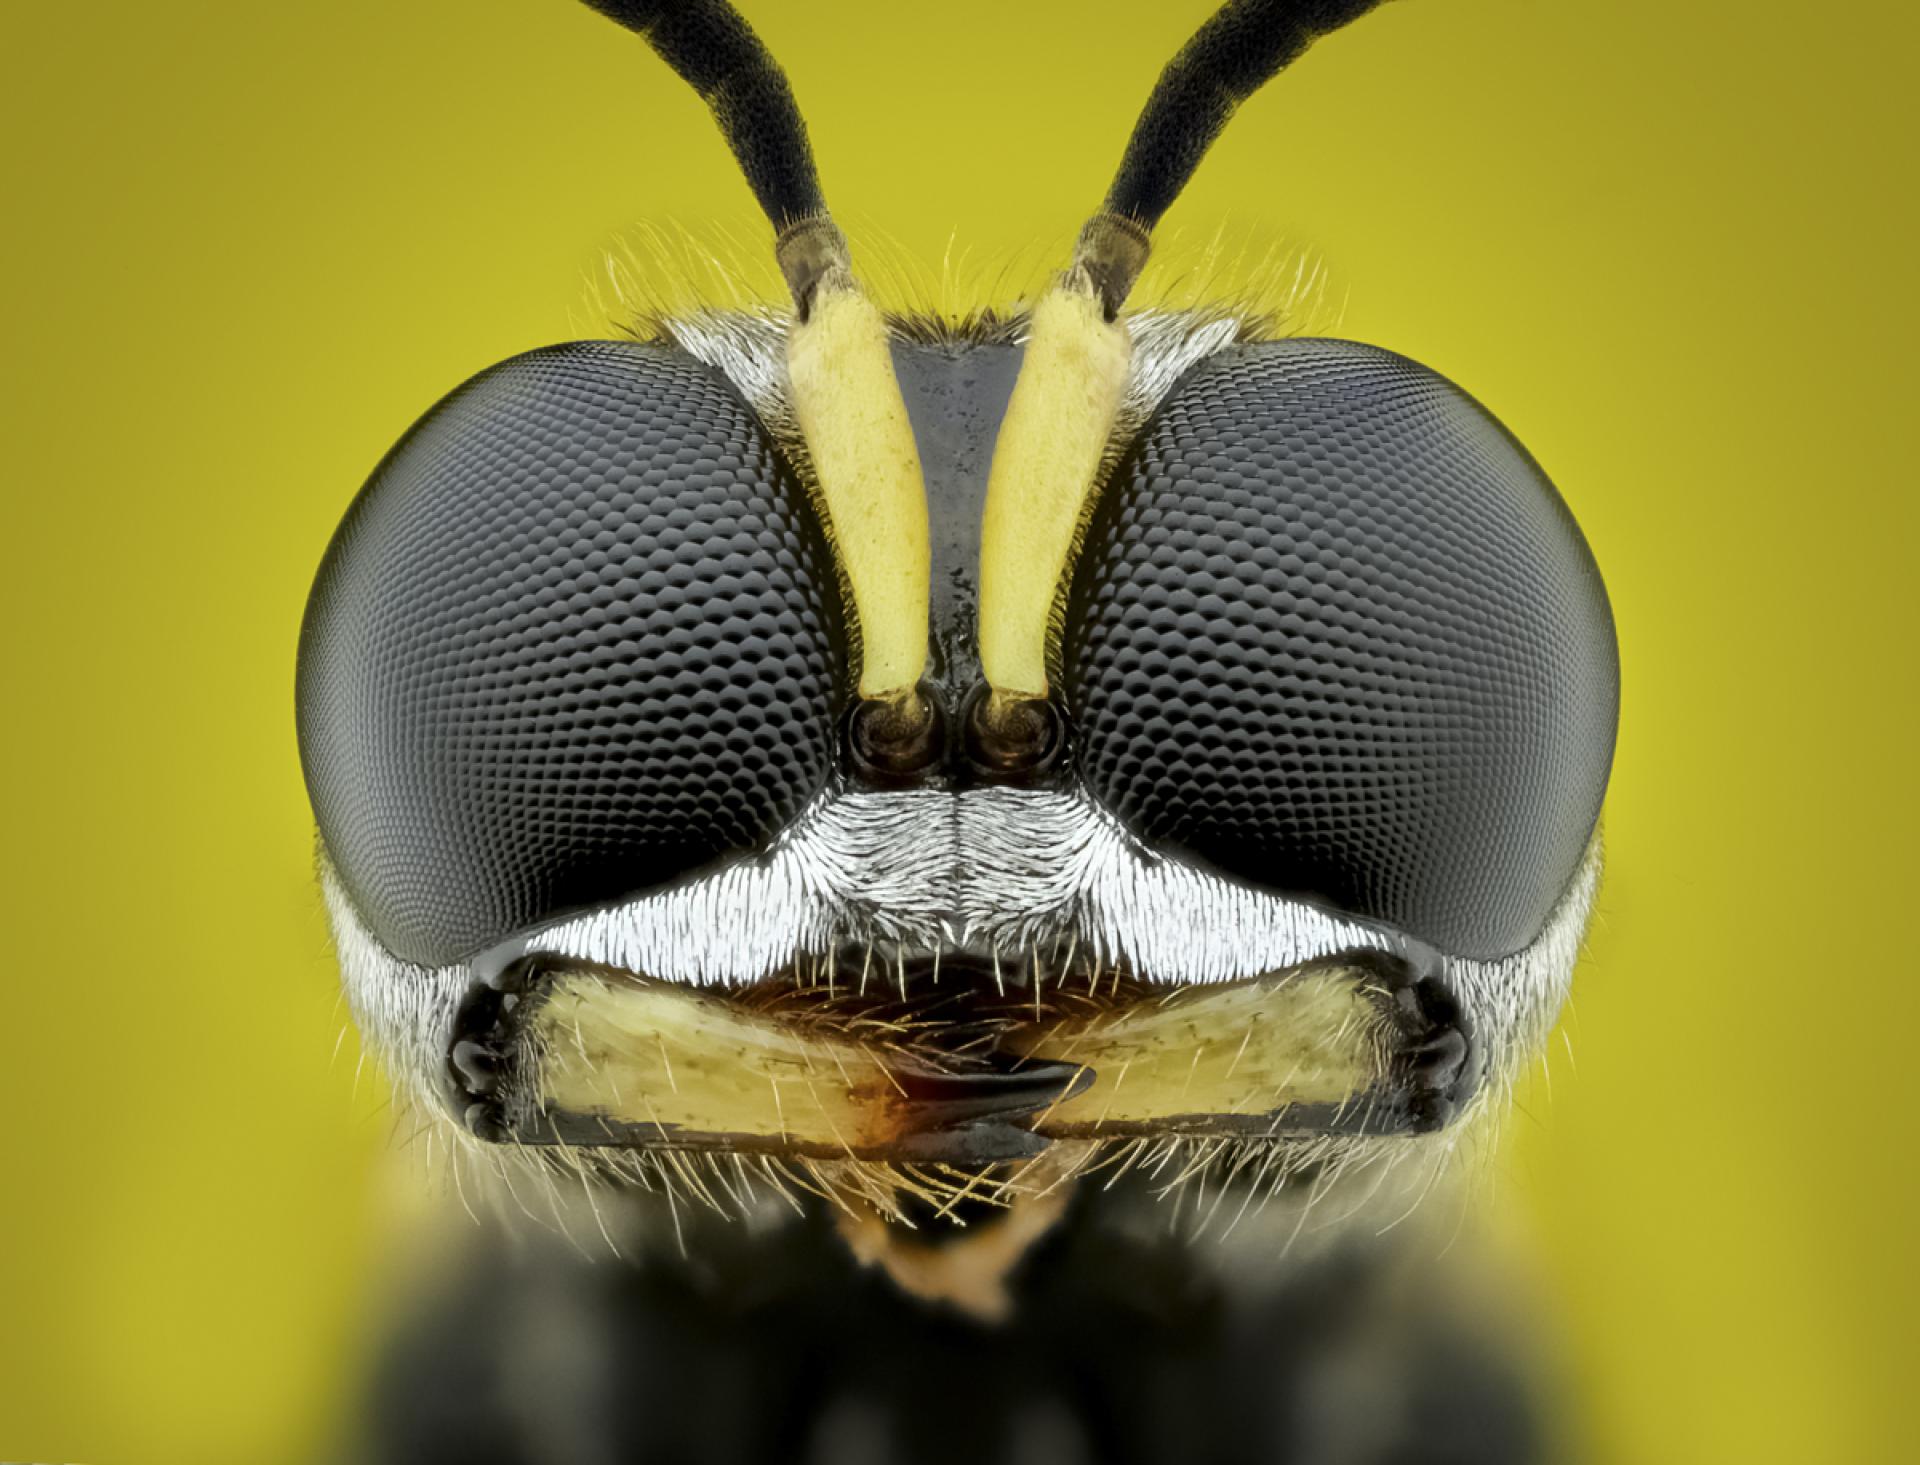 London Photography Awards Winner - The Beauty of Insects